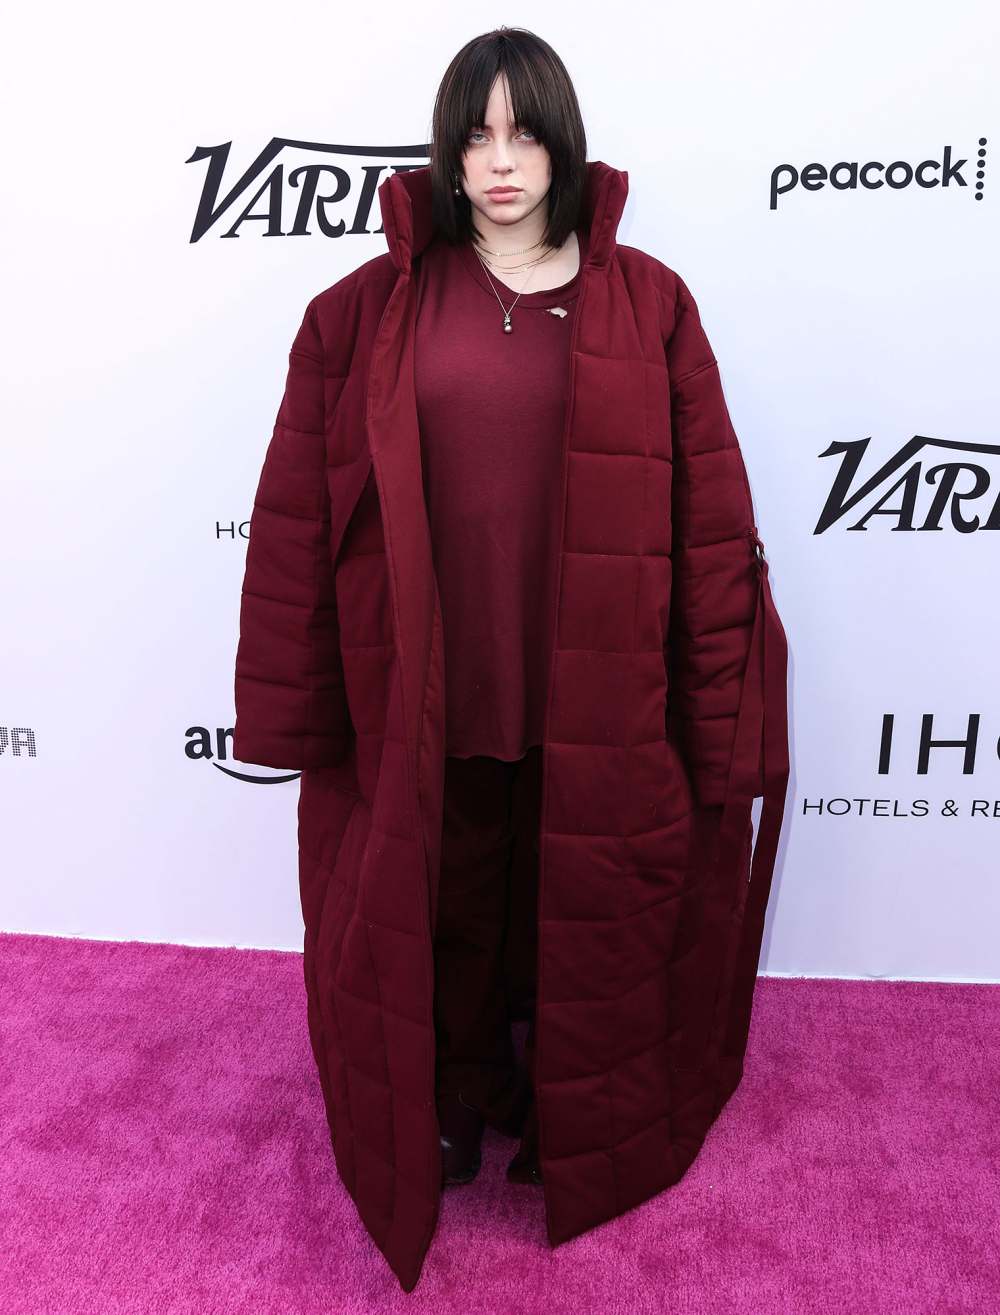 Billie Eilish Says She Would ‘Rather Die’ Than Not Have Children